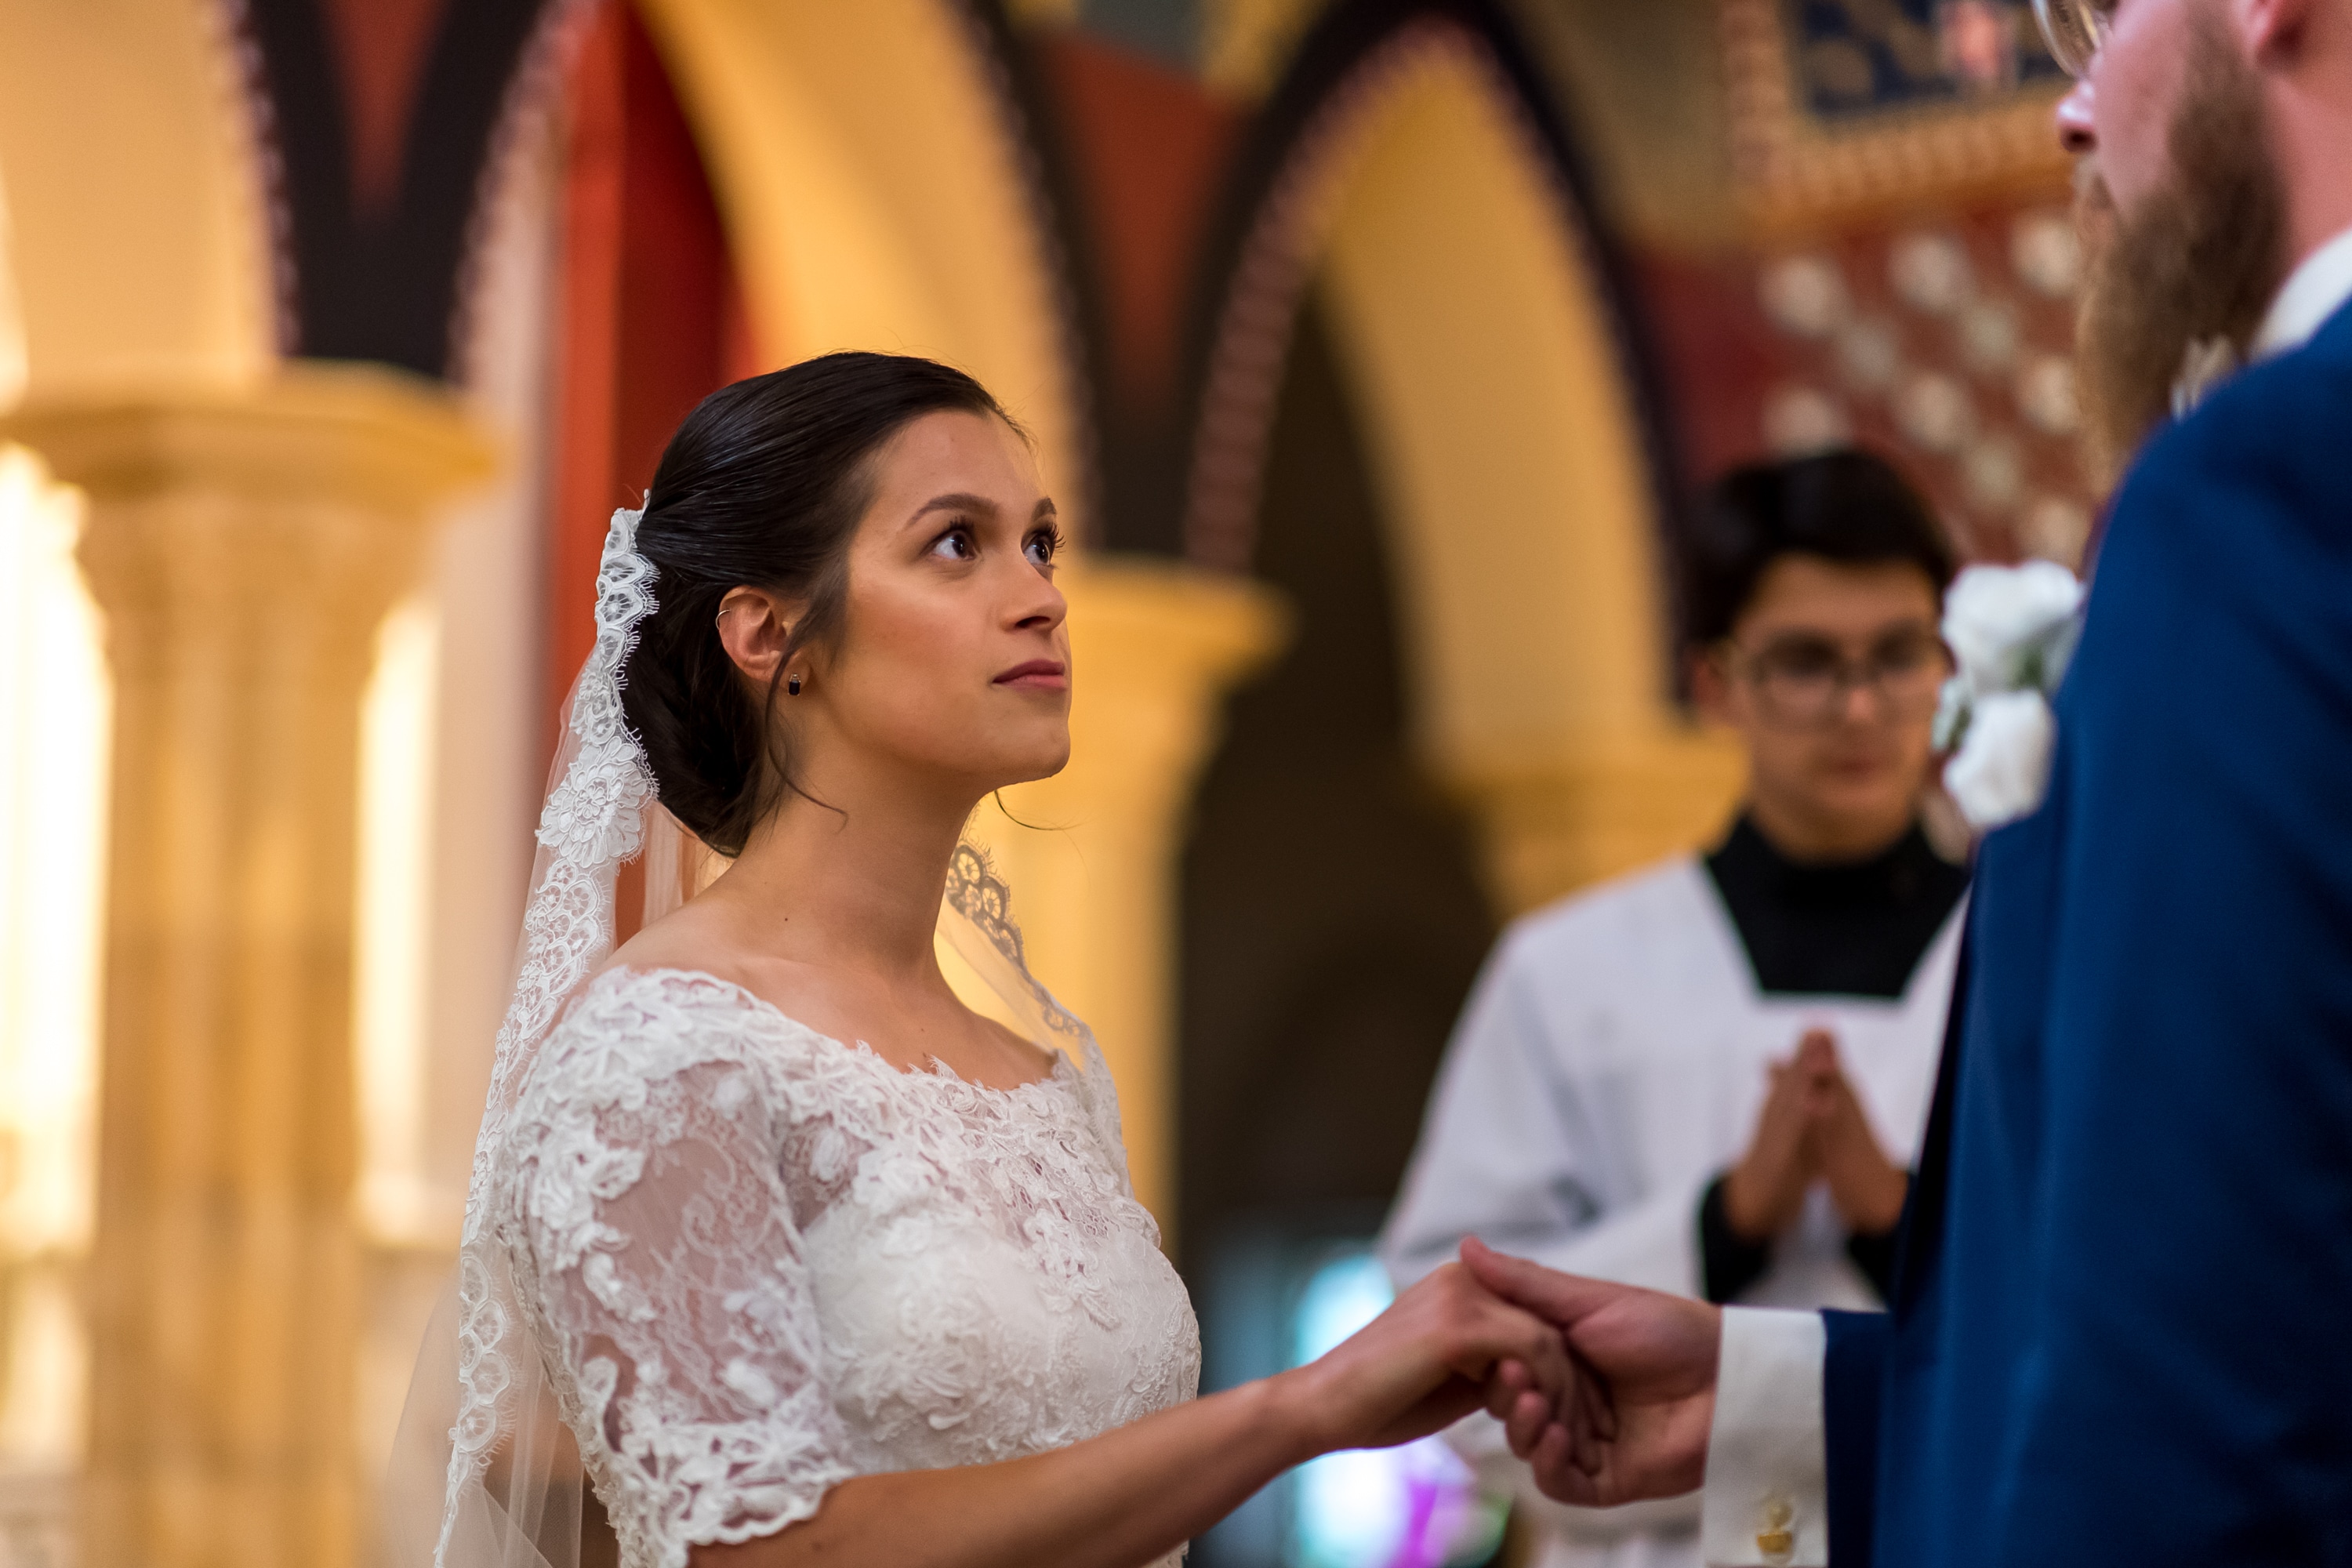 Bride looks on during her wedding at Our Lady of Mt. Carmel in Littleton, Colorado.